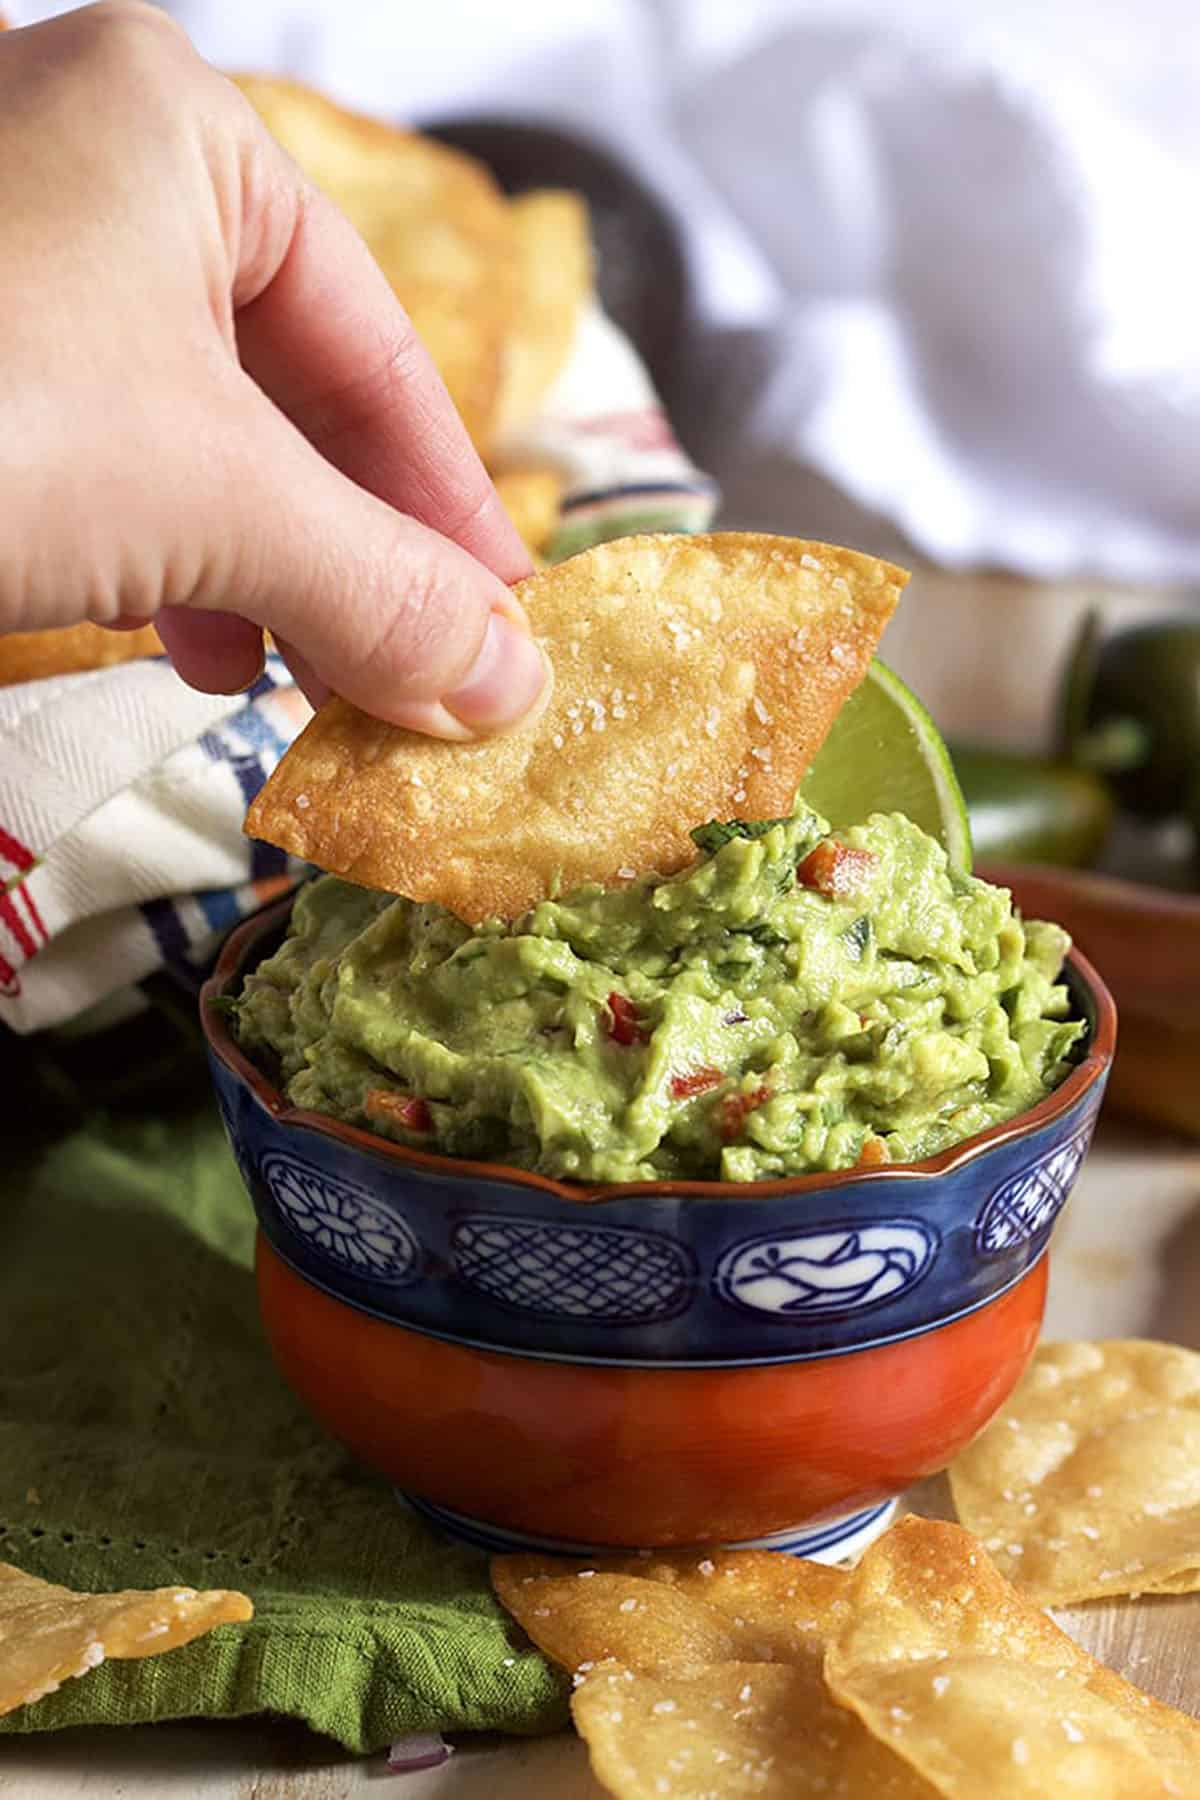 red and blue bowl with guacamole and a hand holding a tortilla chip dipping it into the bowl.